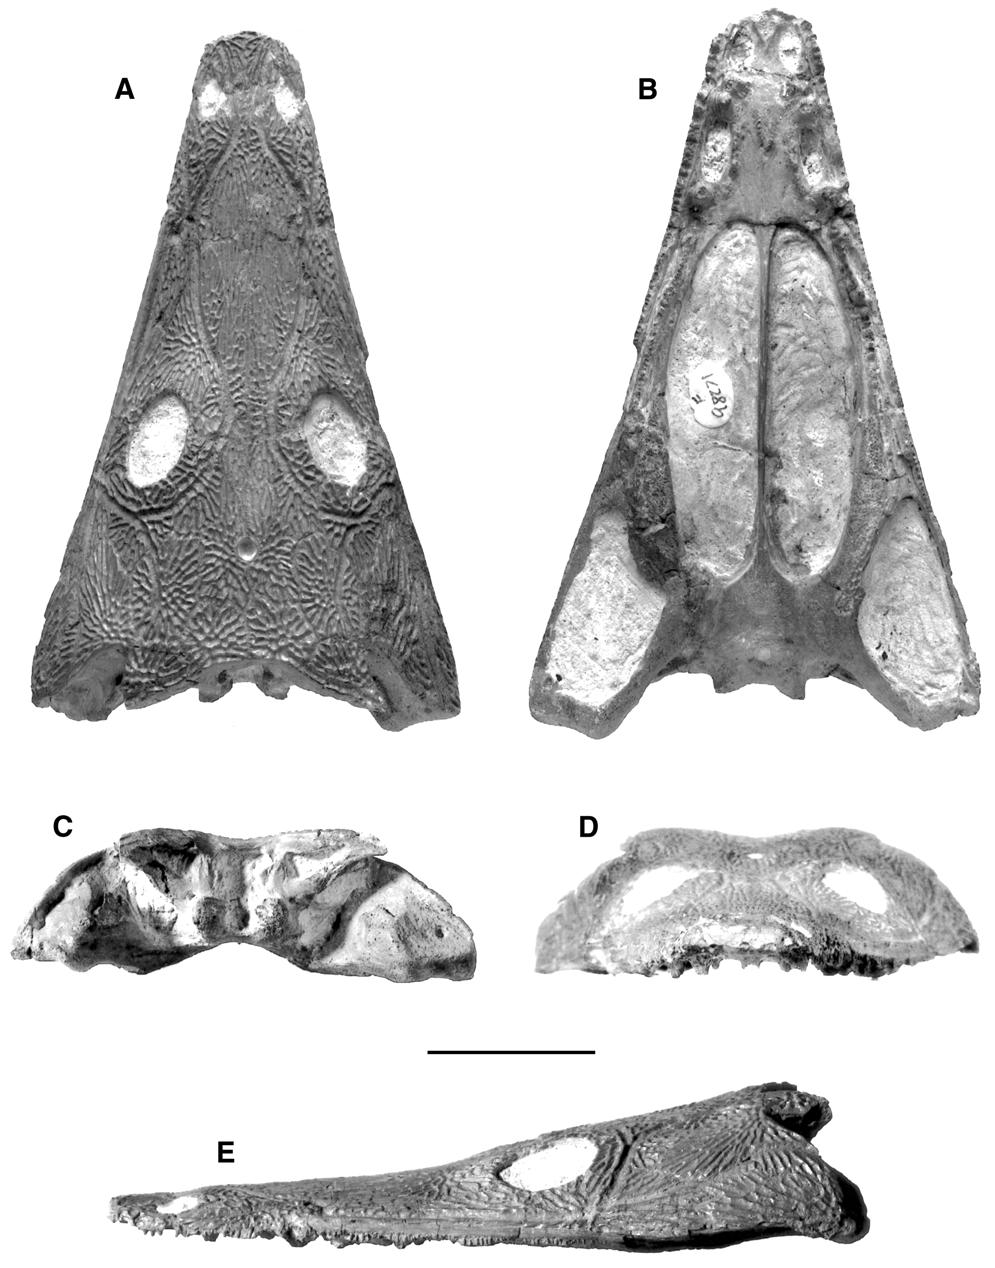 334 Records of the Australian Museum (2003) Vol. 55 Fig. 1.